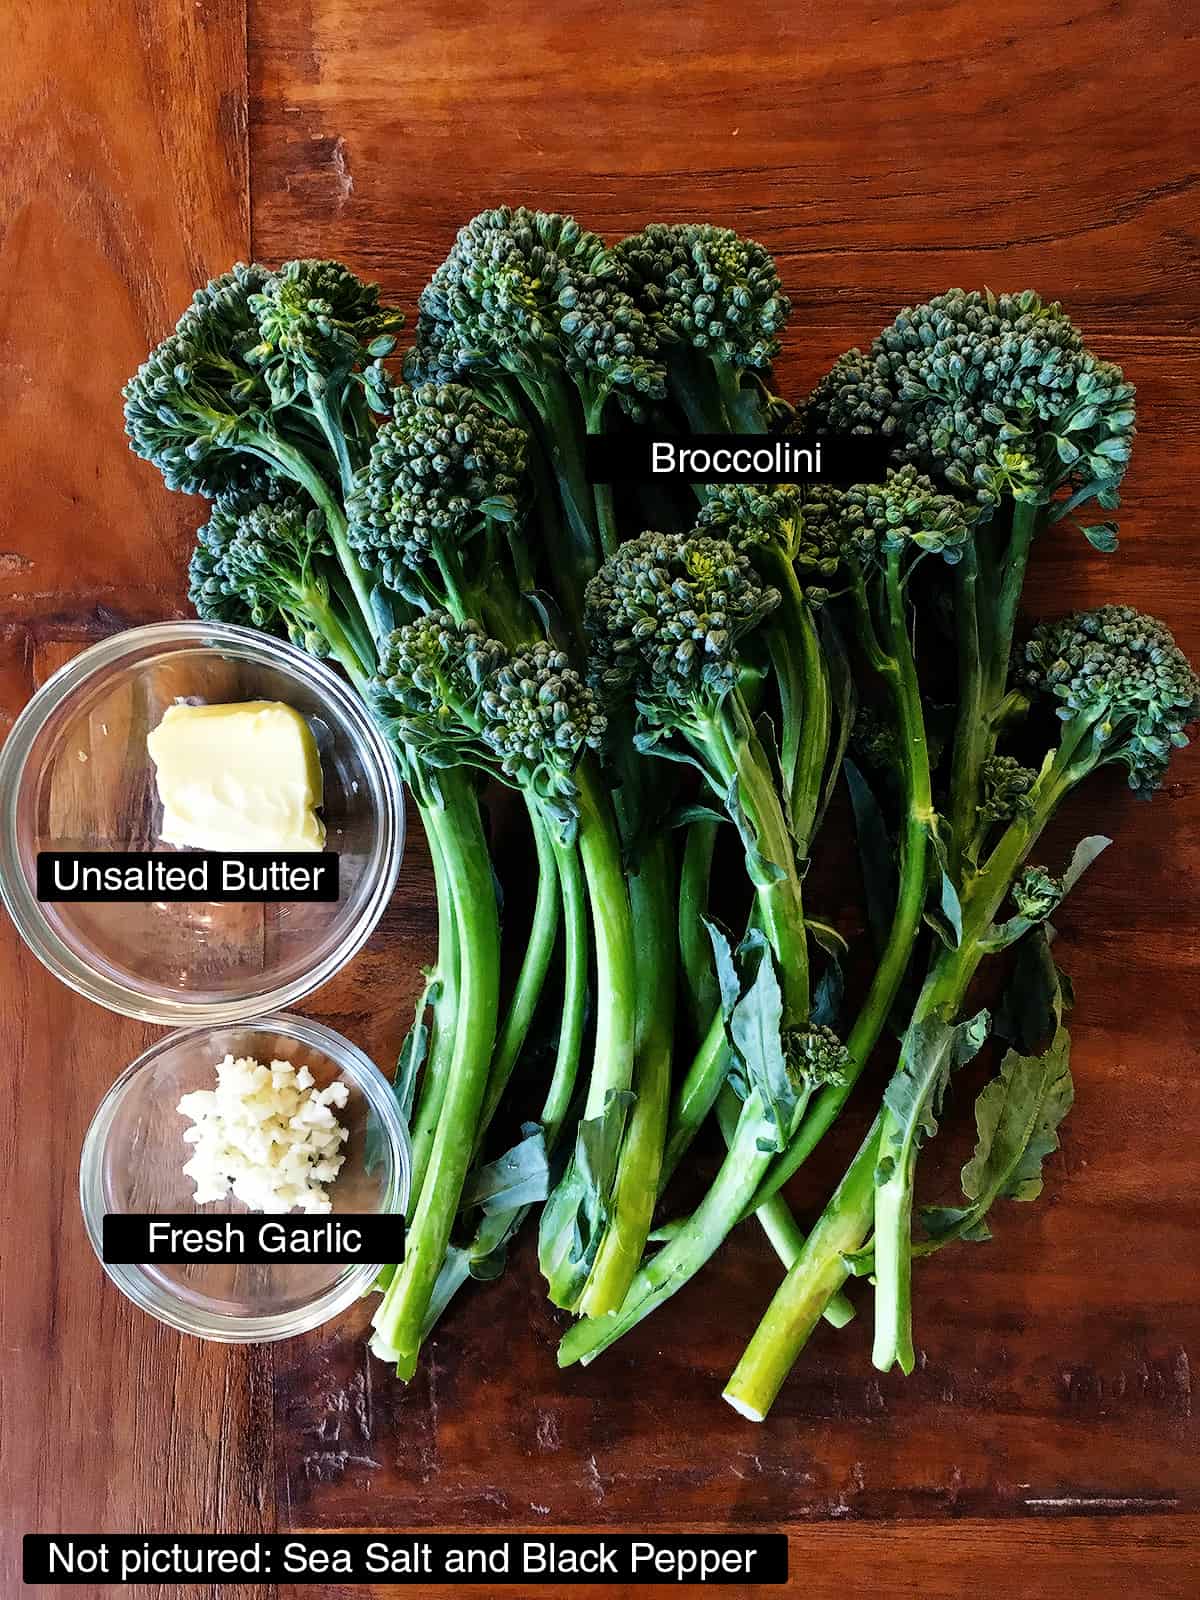 Fresh broccolini stalks next to small glass bowls of butter and minced garlic on a brown wood table.